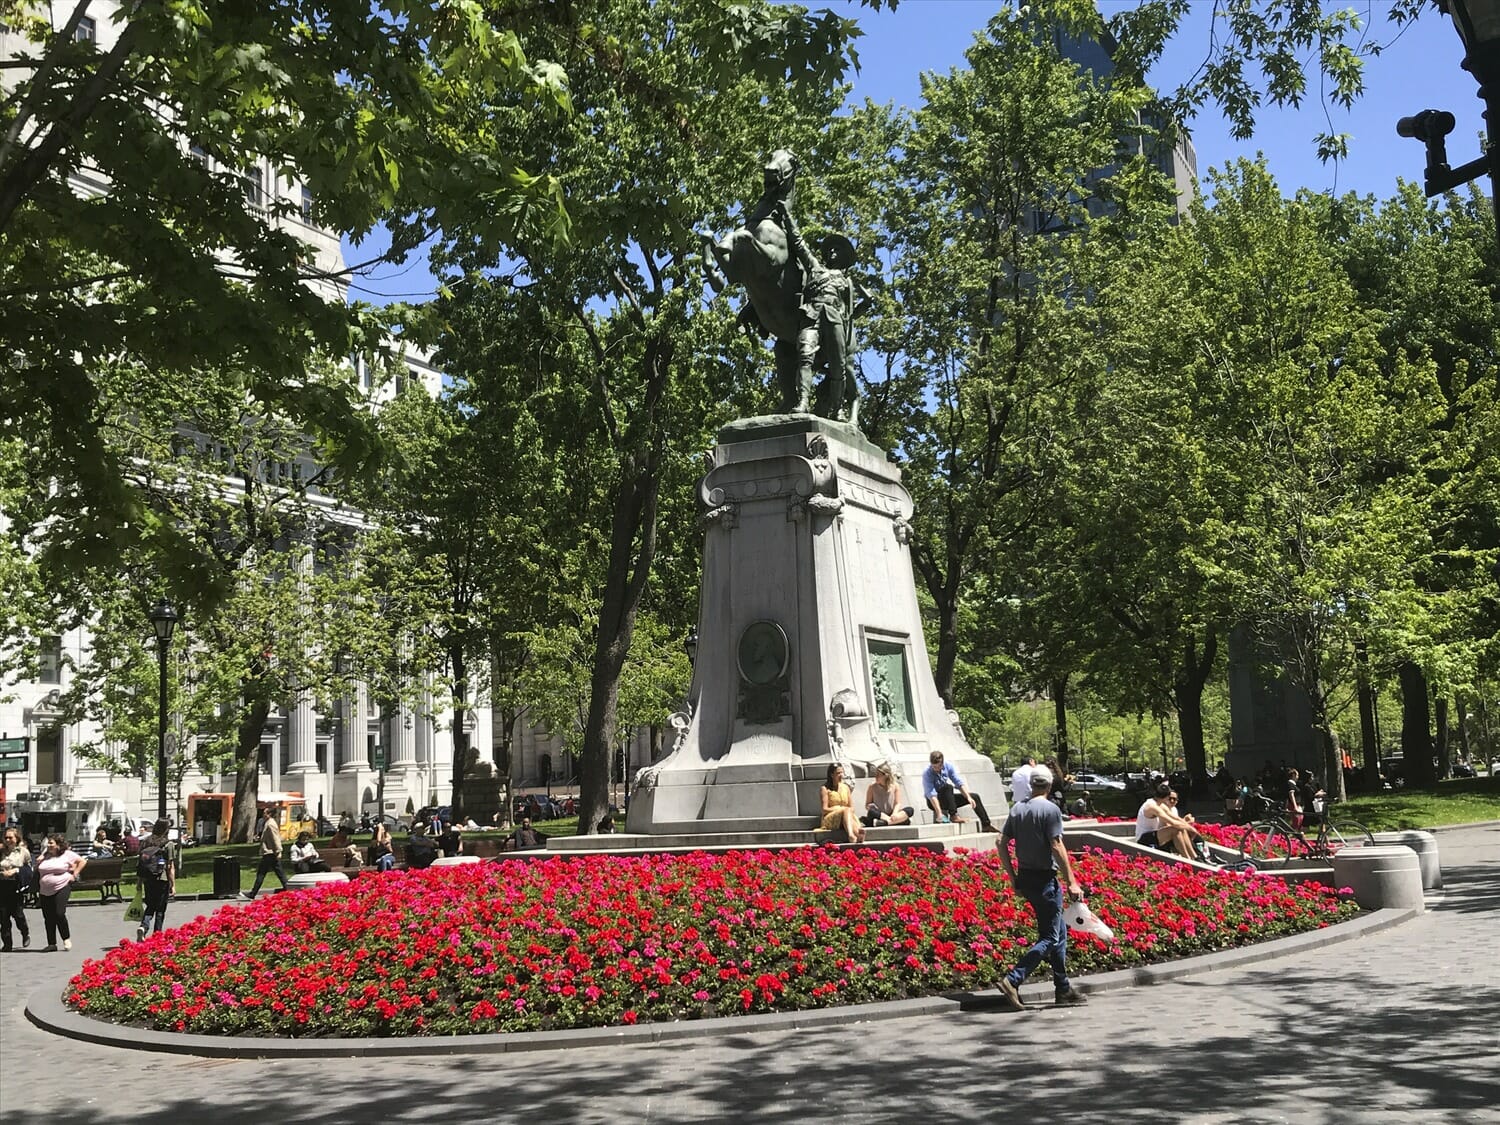 A statue of a man in a park surrounded by red flowers.